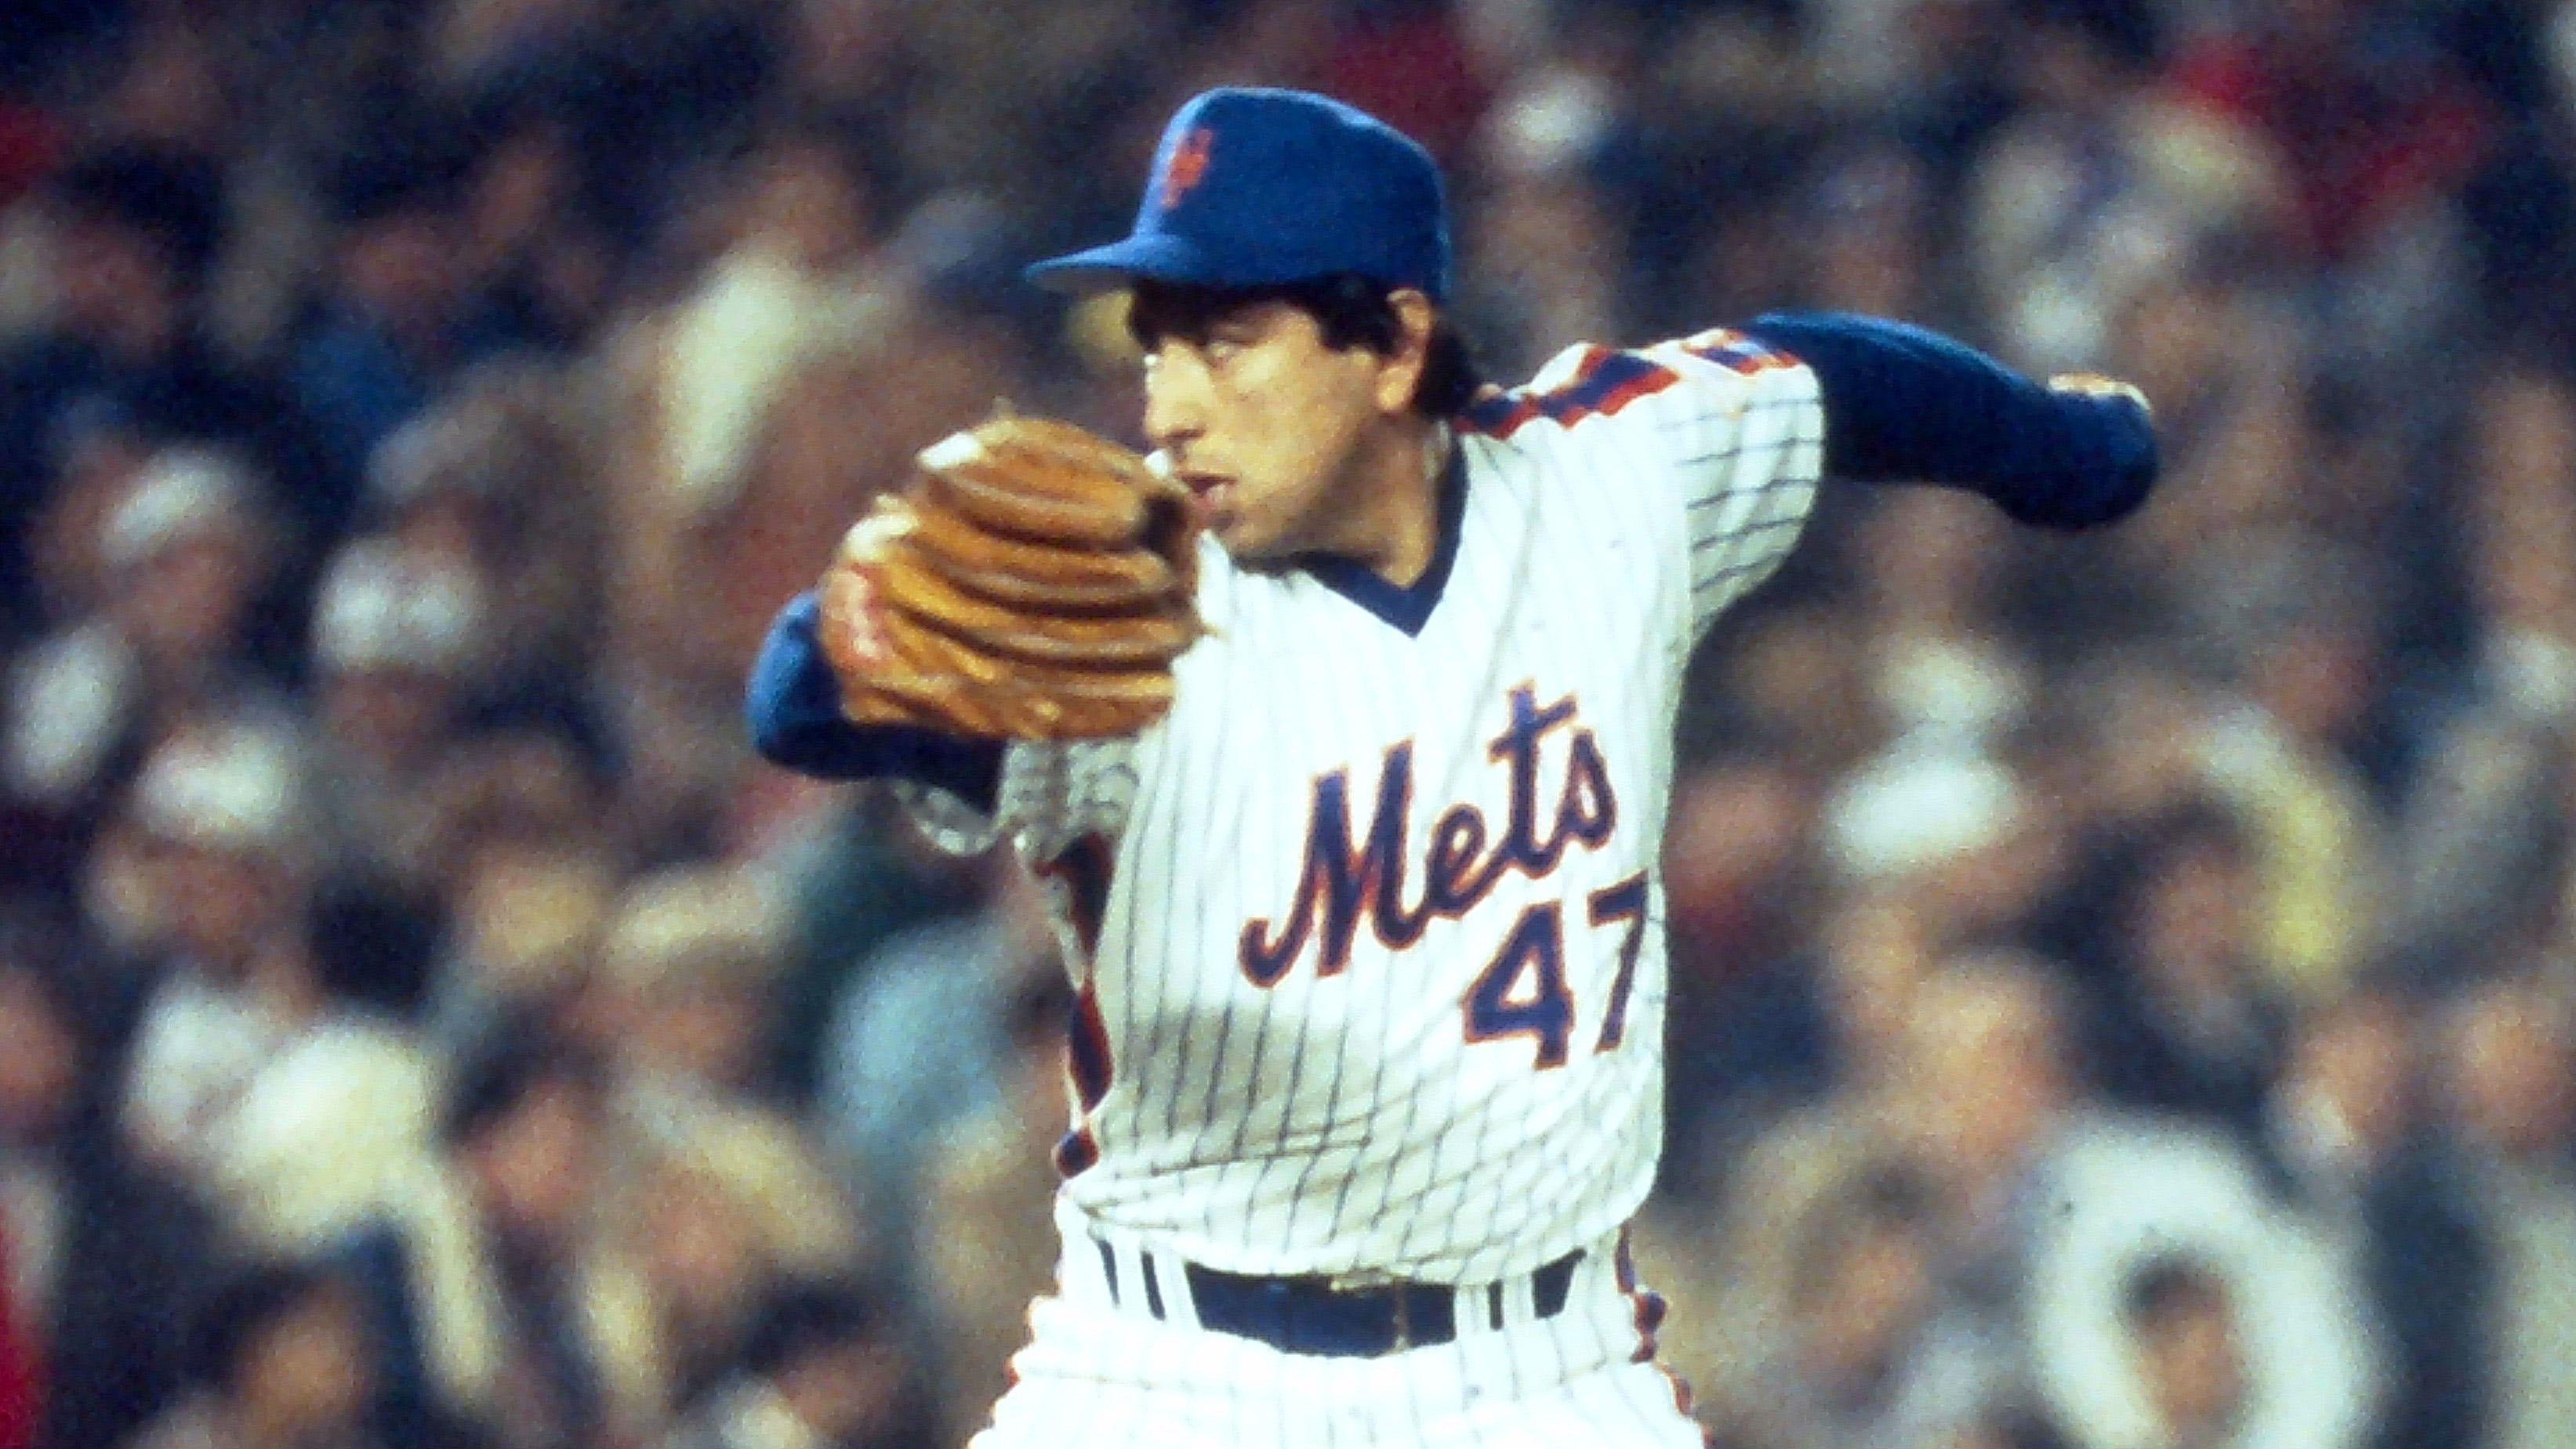 Jesse Orosco pitching against the Red Sox in the 9th inning during Game 7 of the World Series at Shea Stadium Oct. 27, 1986. Mets Vs Red Sox 1986 World Series / Frank Becerra Jr/USA TODAY / USA TODAY NETWORK